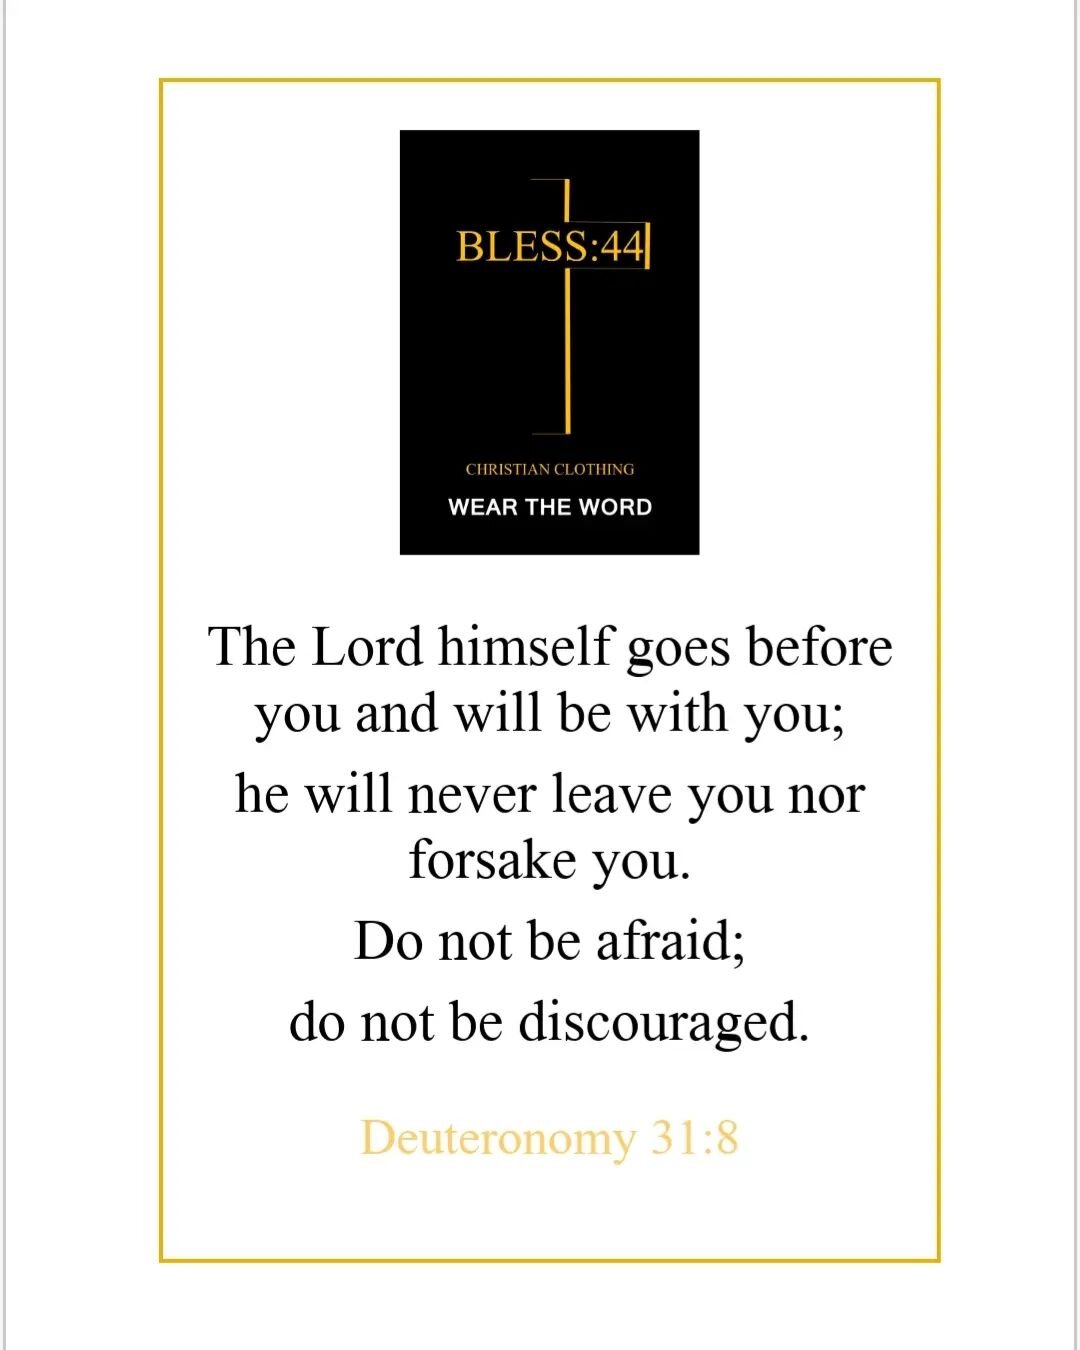 If you need comfort, 
Do not be afraid!
Deuteronomy 31-8
#deuteronomy #donotbeafraid #ifyouneedcomfort #bibleverse #christianlifestyle
#weartheword